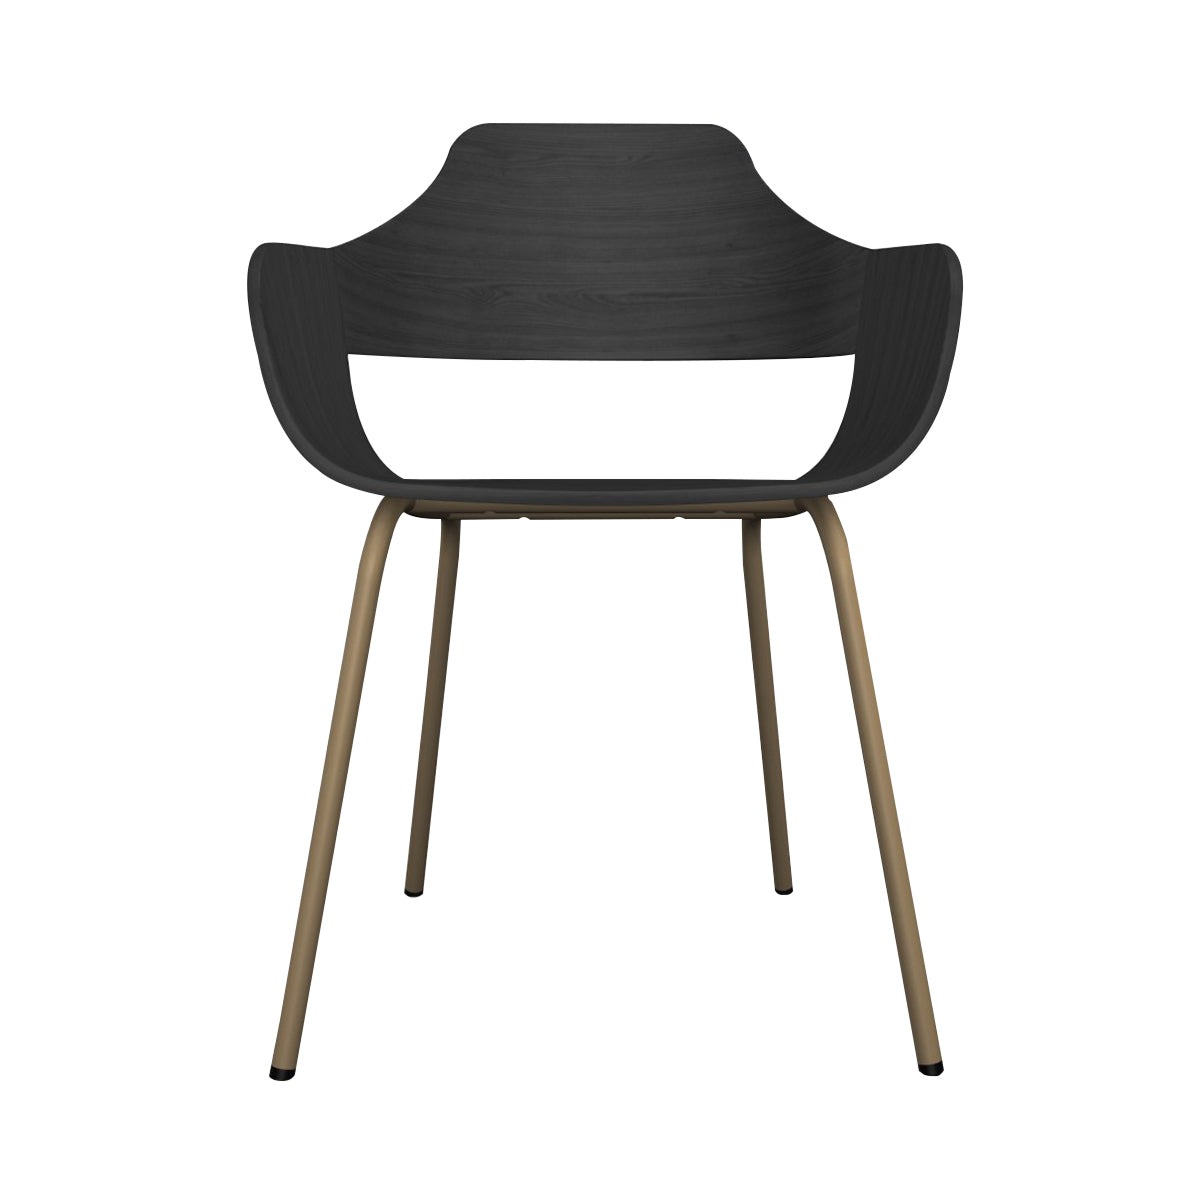 Showtime Chair with Metal Base: Ash Stained Black + Beige